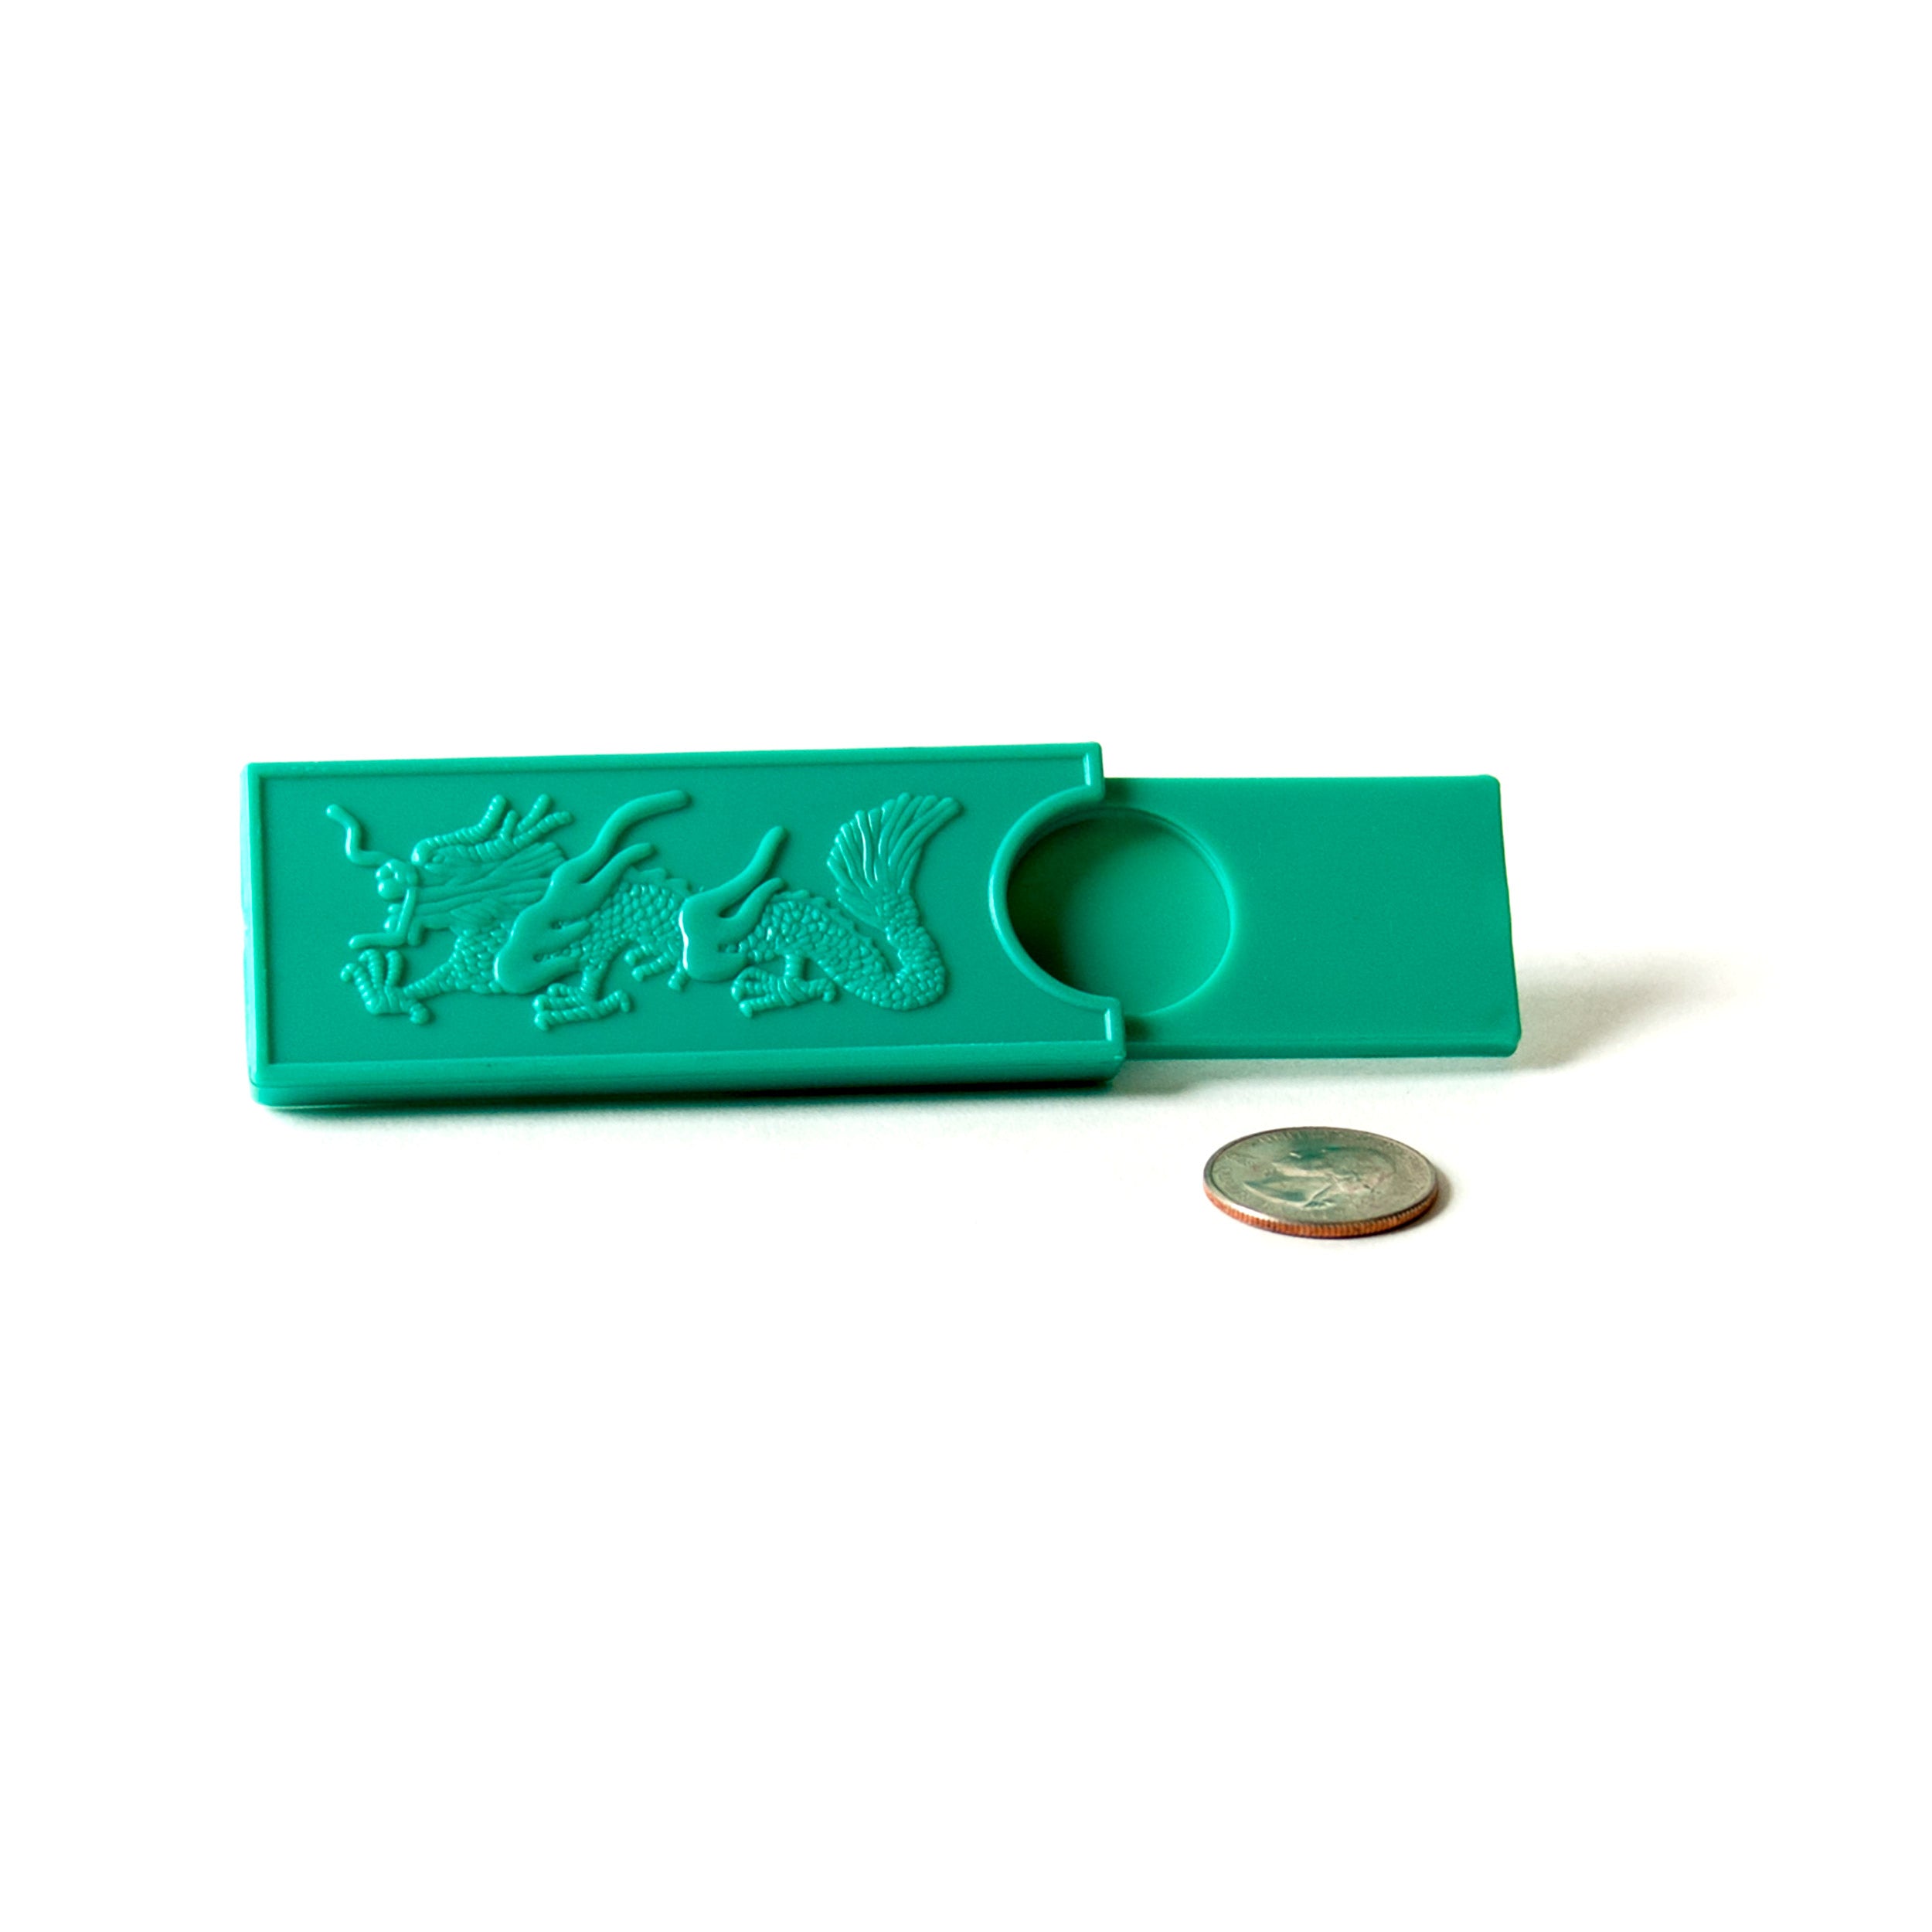 4" x 2" teal plastic case with a dragon design. Two shelves allow you to hide the coin within the case.